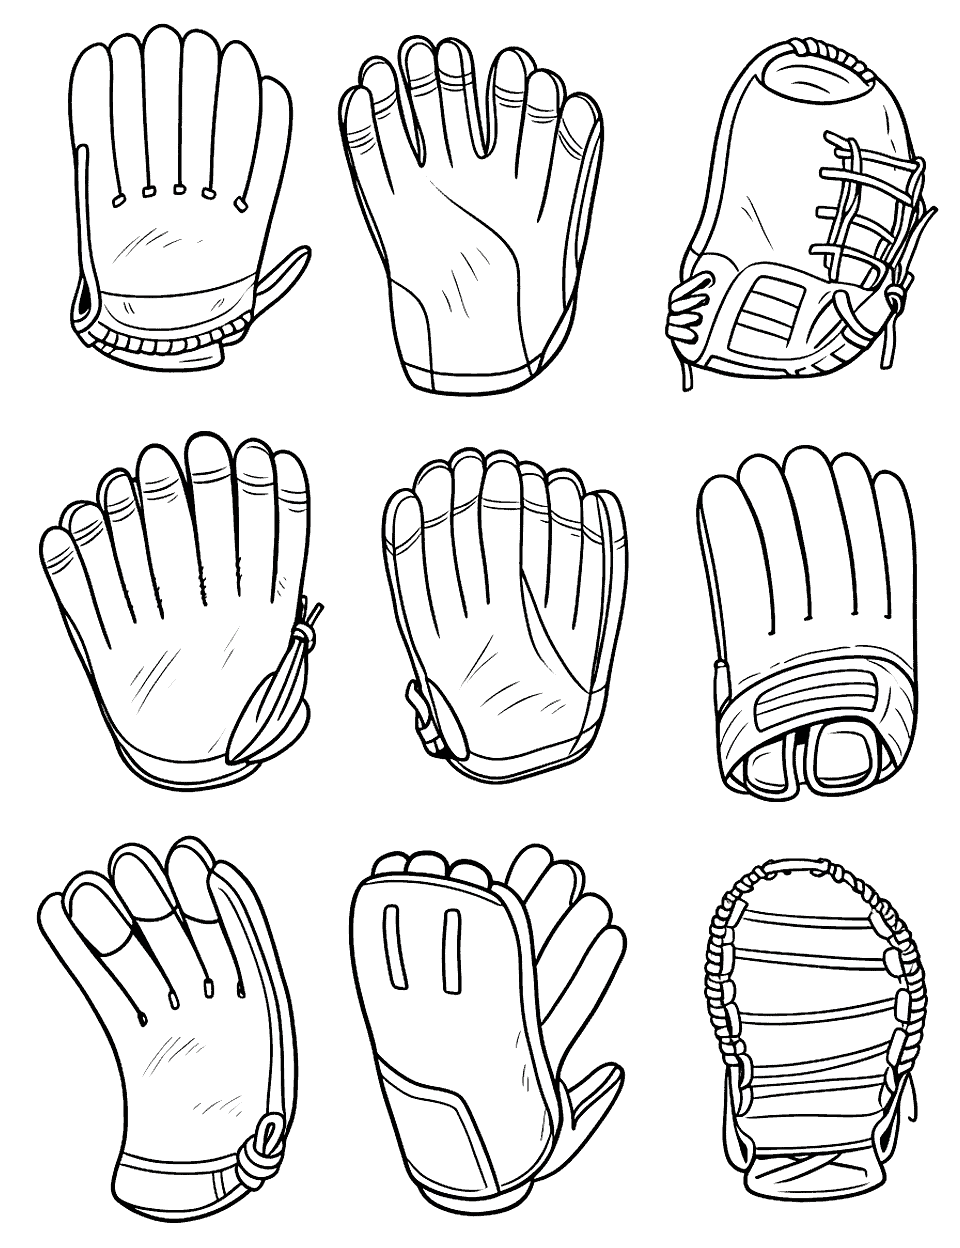 Baseball Glove Collection Coloring Page - A variety of baseball gloves, each with different designs.